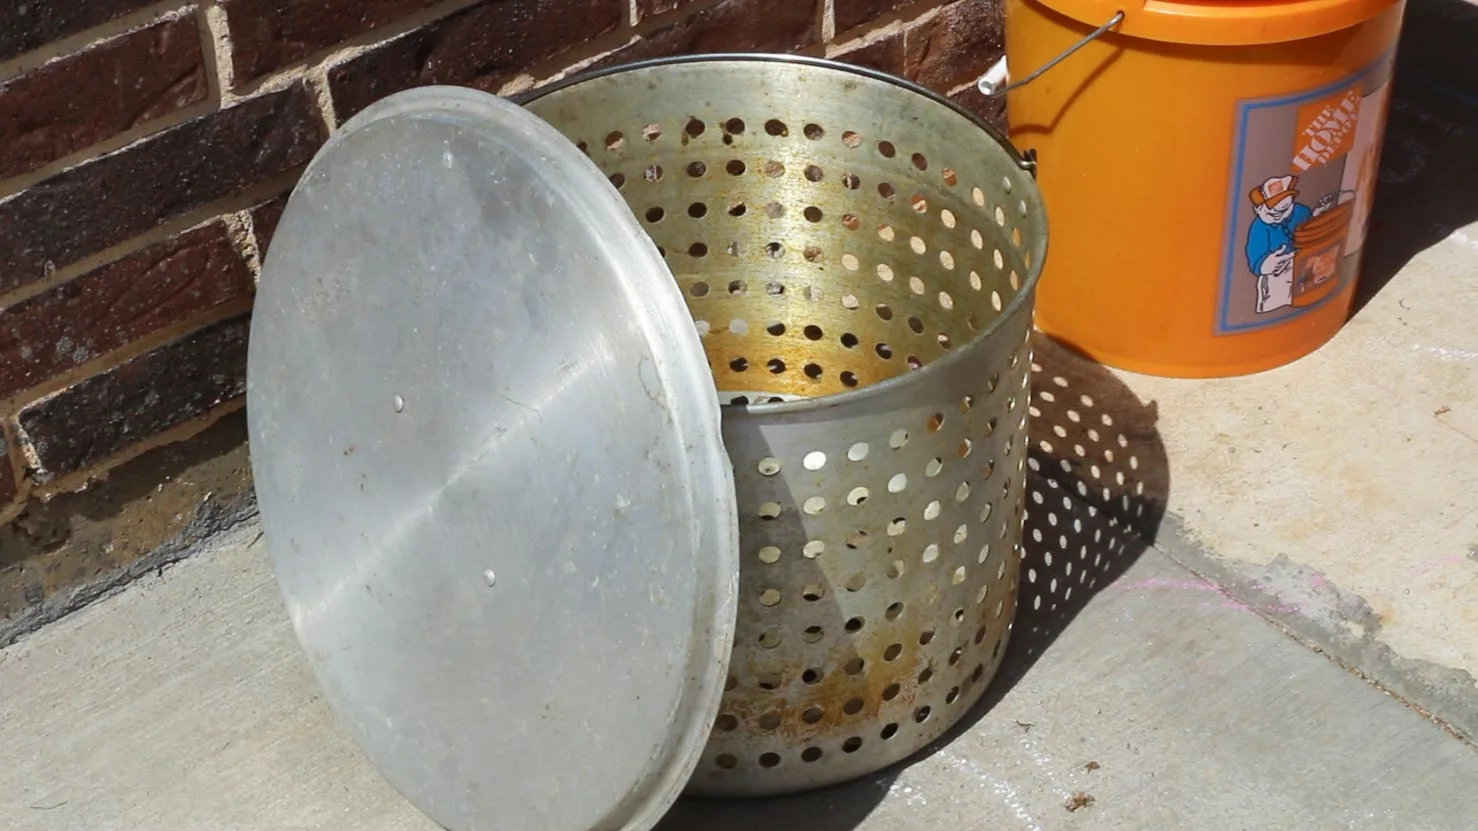 Crawfish boiling pot strainer or steamer basket for pulling the completed crawfish up and out of the court bouillon. 